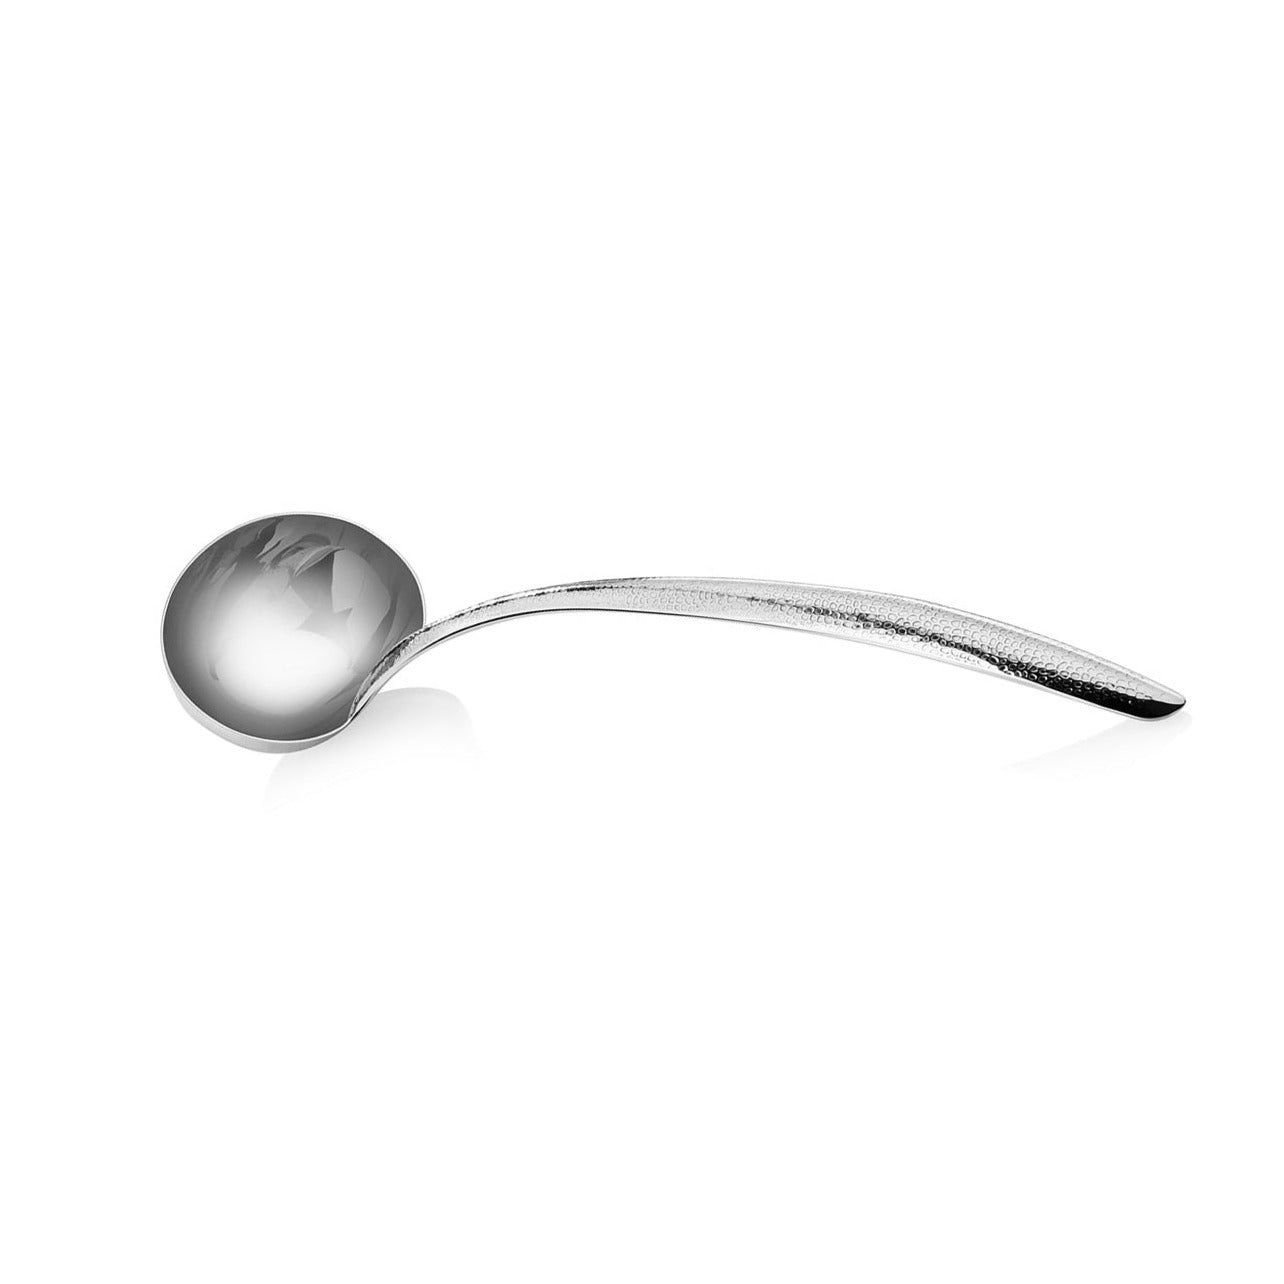 Cuisinox Deluxe Hammered Serving Ladle